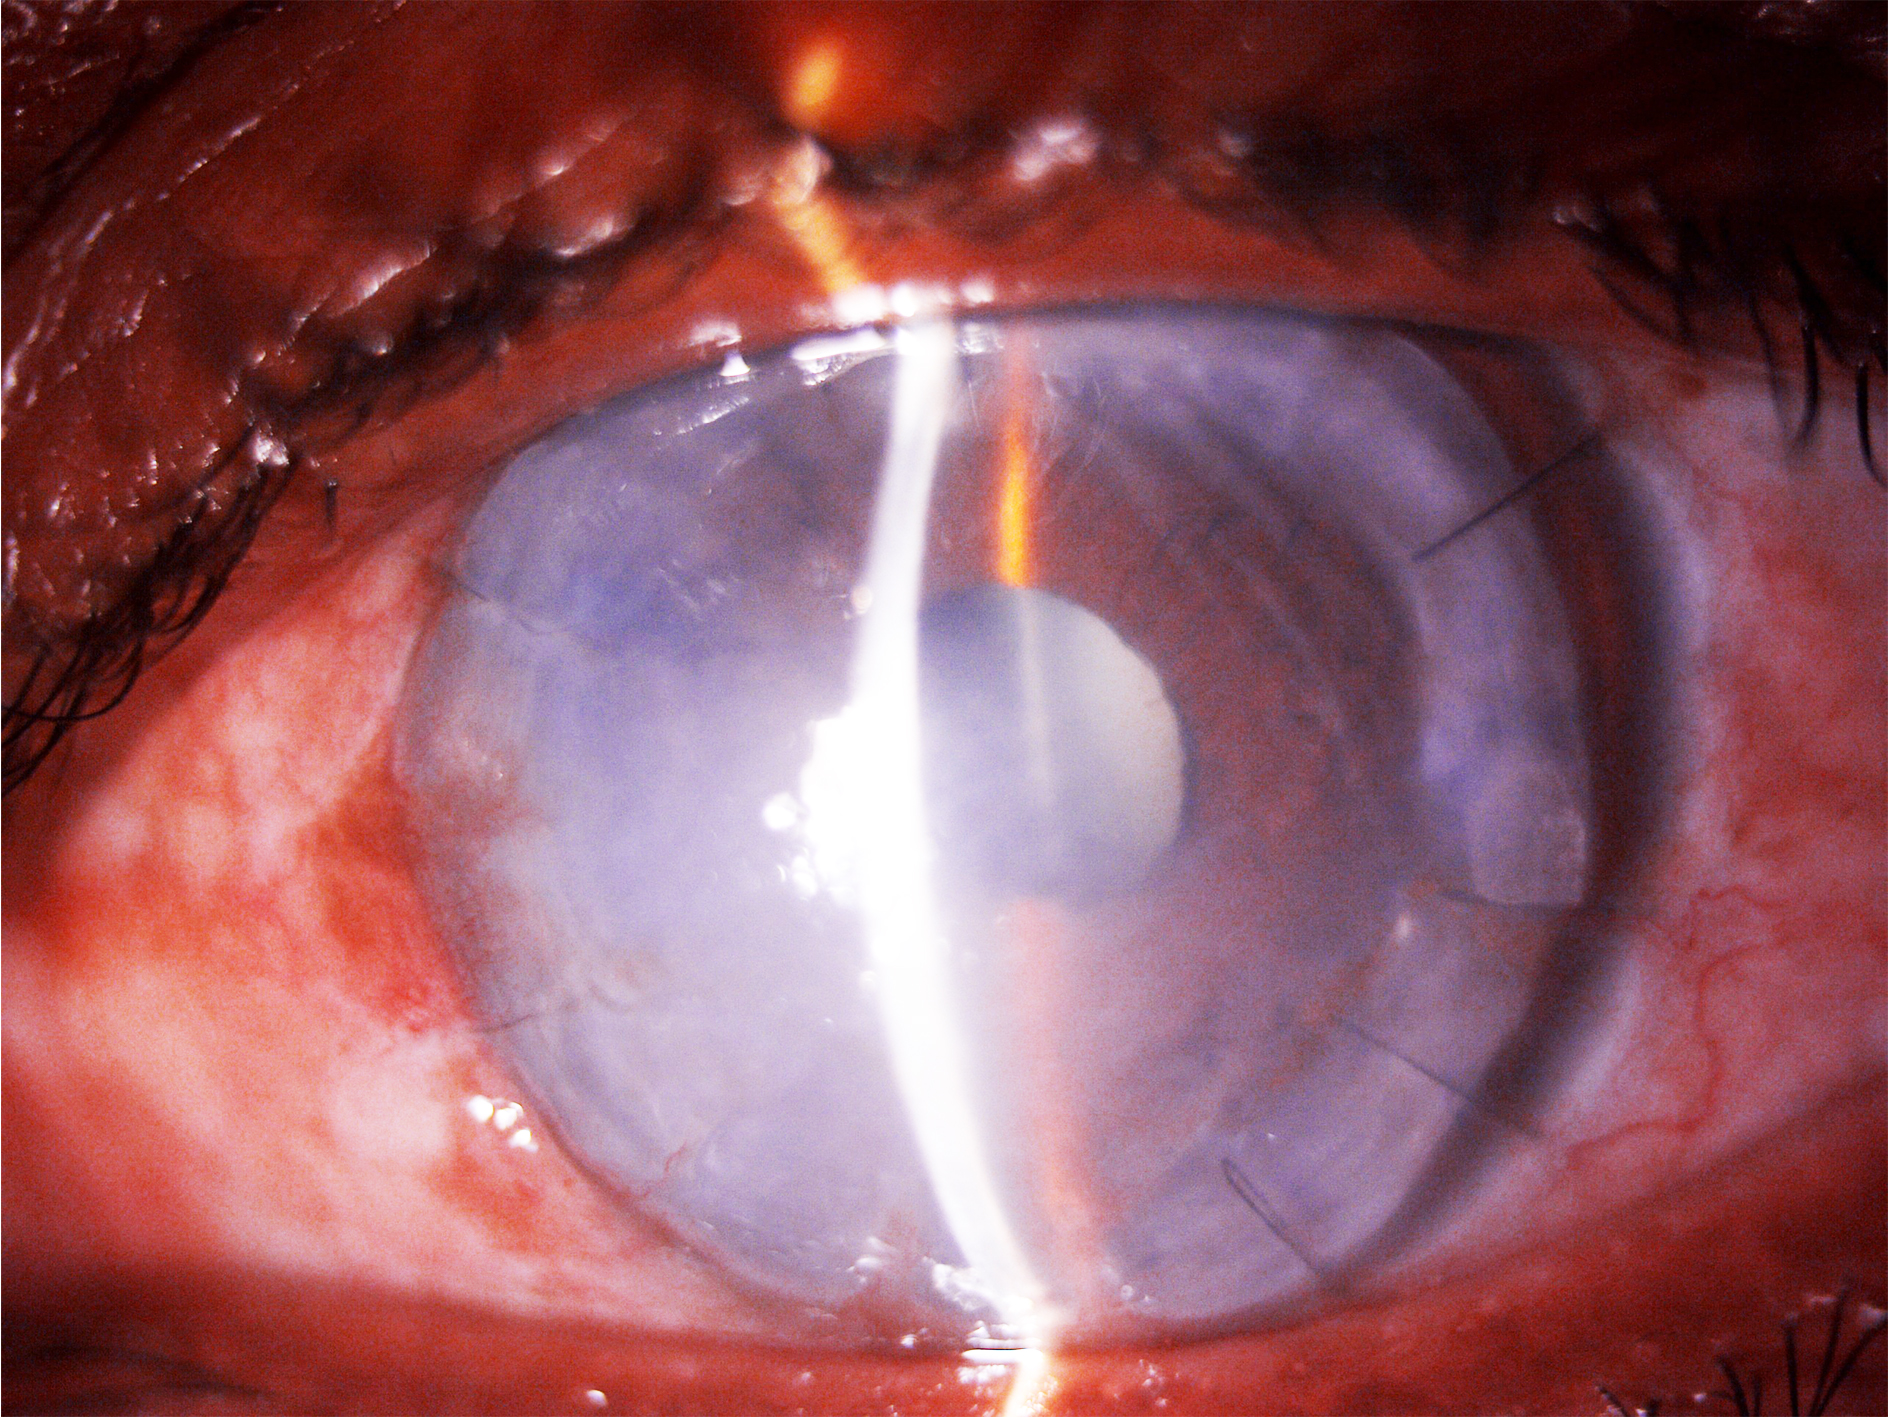 Figure 2- Slit lamp image of a patient of Pythium keratitis post Therapeutic keratoplasty. The image depicts mild conjunctival congestion, large 10 mm failed graft, graft host junction is well opposed with edge lift from 1 to 2 o clock, well formed anterior chamber with immature cataract